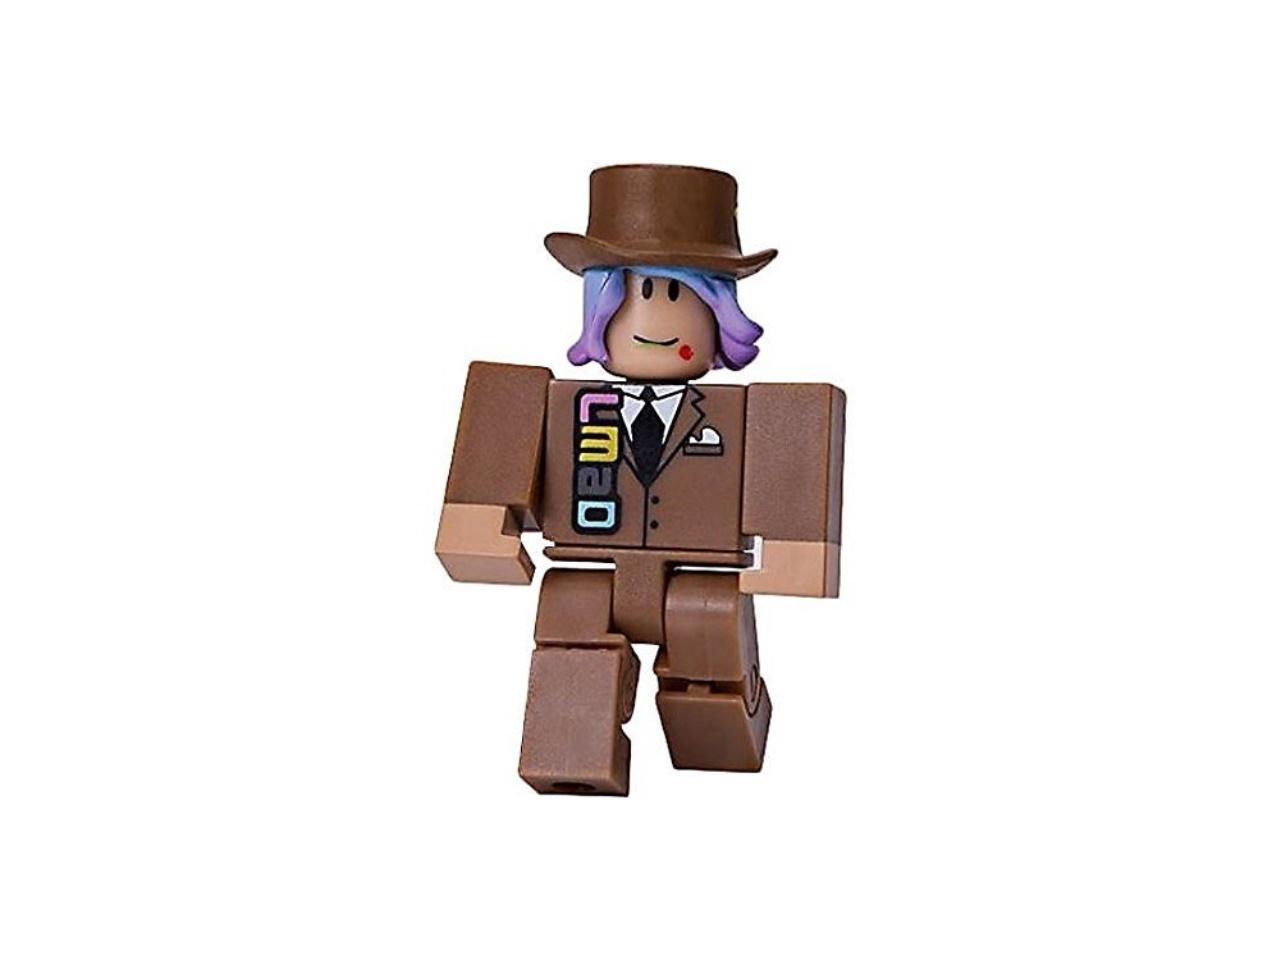 Roblox Series 1 Let S Make A Deal Action Figure Mystery Box Virtual Item Code 2 5 Newegg Com - roblox audio wii shop